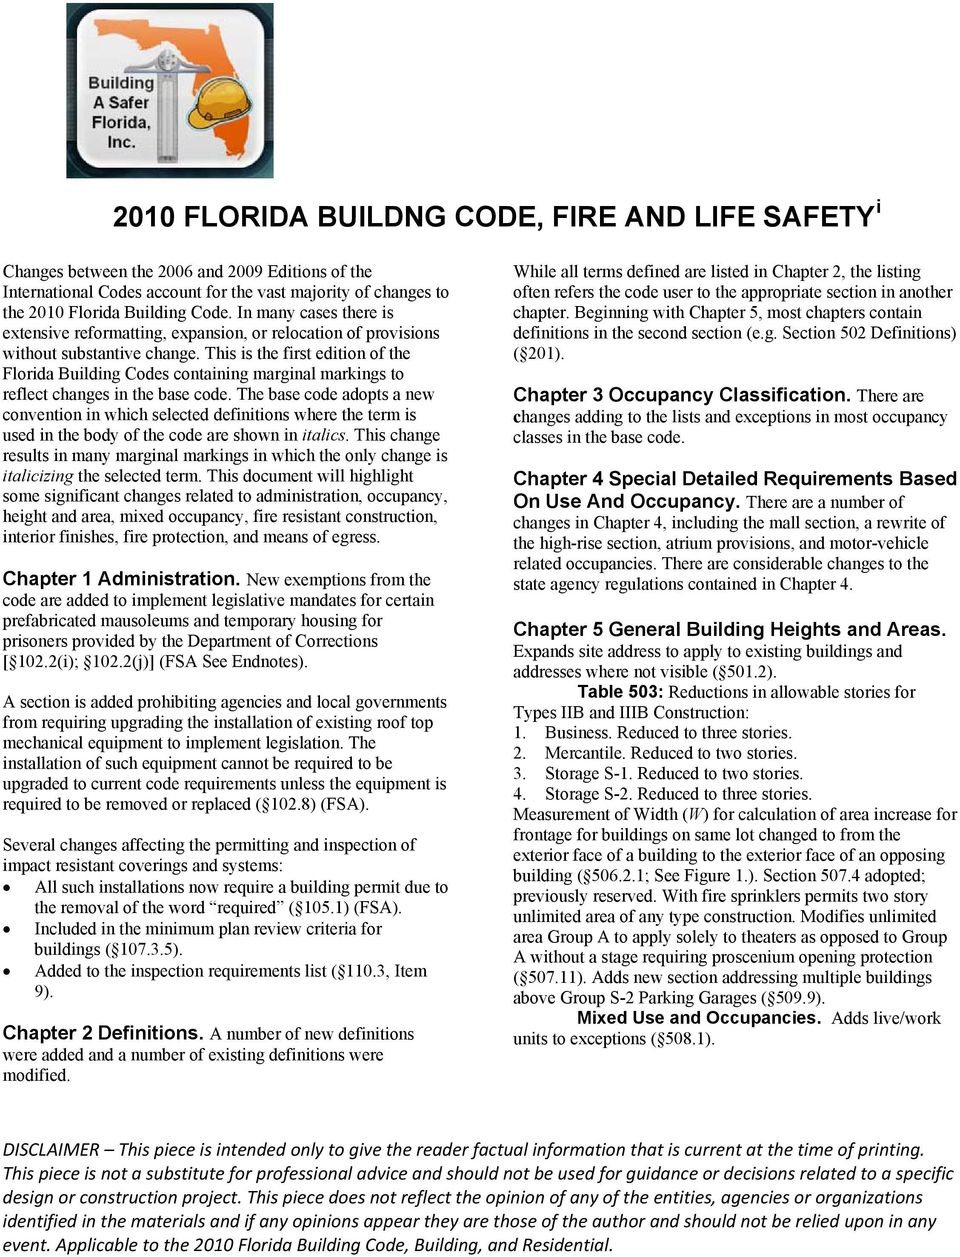 This is the first edition of the Florida Building Codes containing marginal markings to reflect changes in the base code.